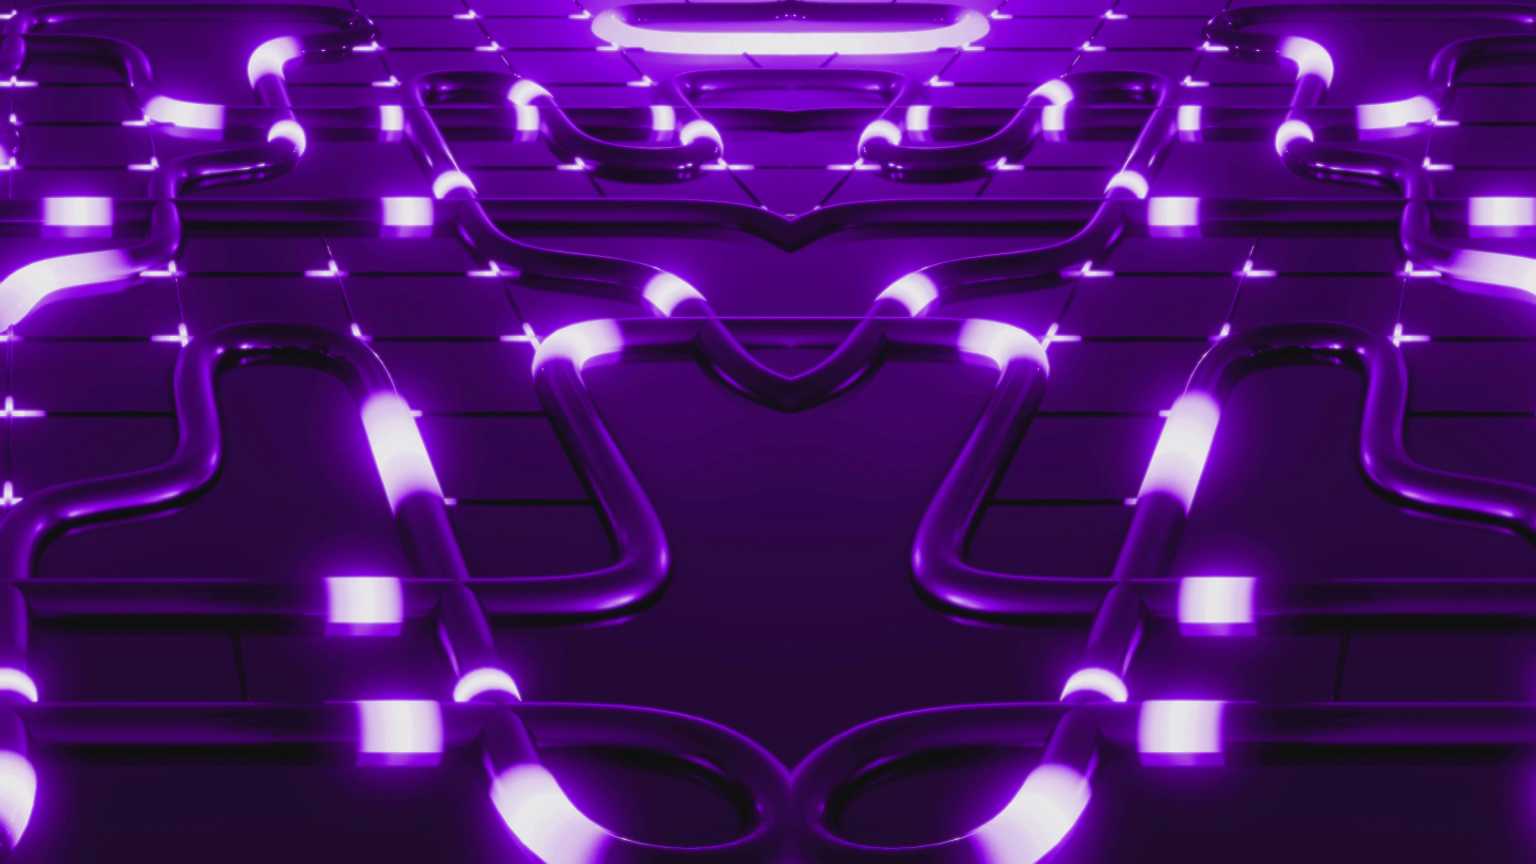 4K Purple Neon Pipes Looped Screensaver || Free UHD Motion Background || Free Download